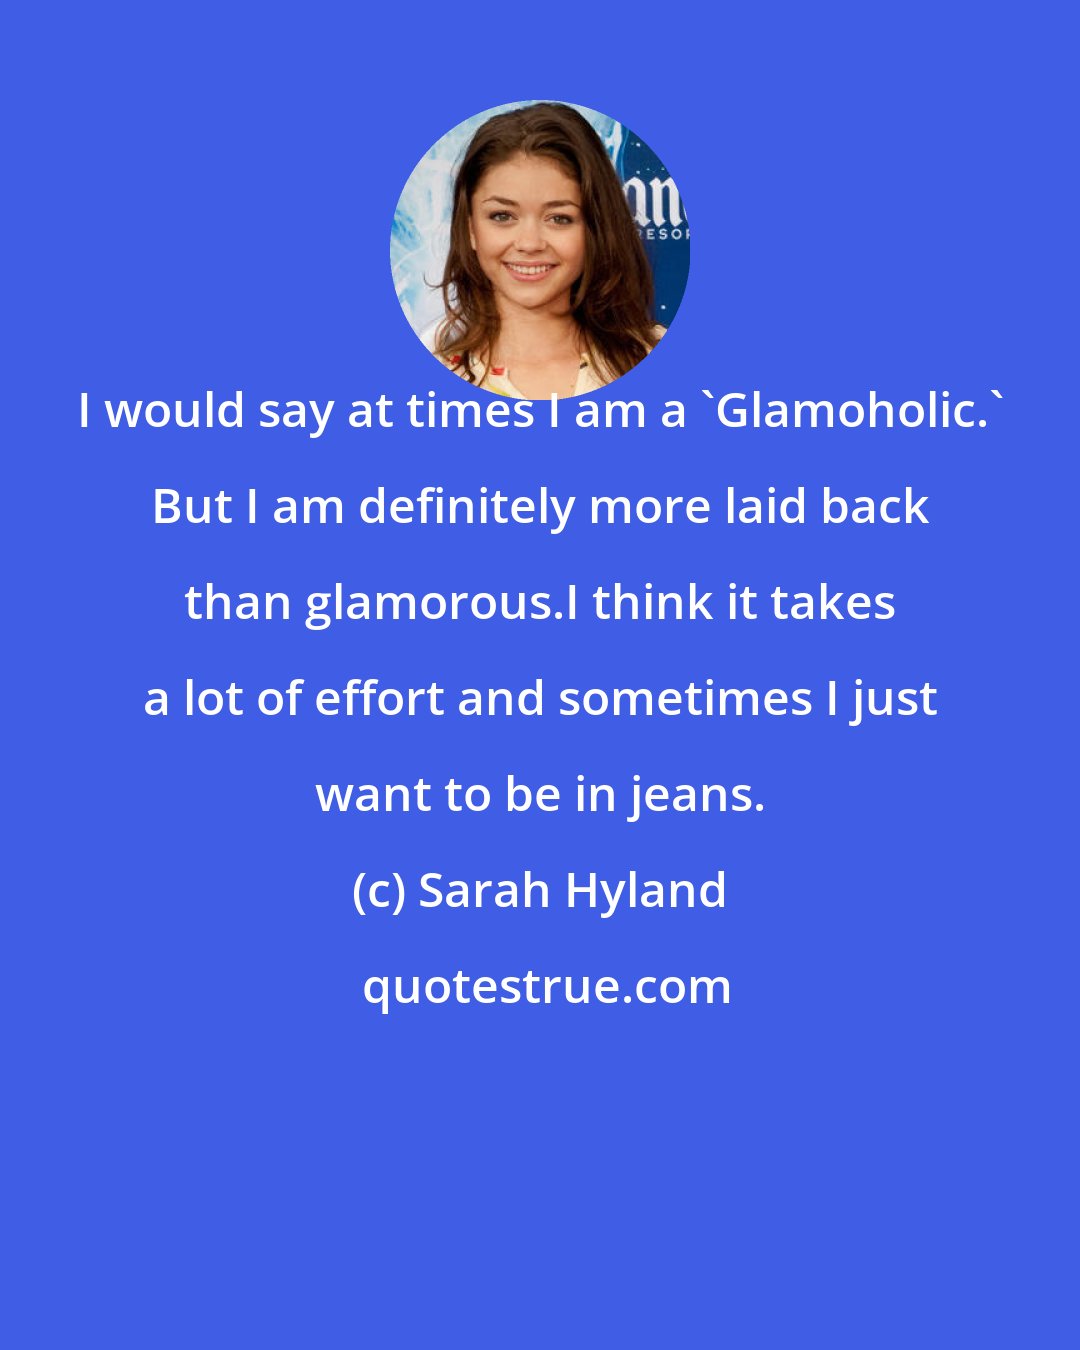 Sarah Hyland: I would say at times I am a 'Glamoholic.' But I am definitely more laid back than glamorous.I think it takes a lot of effort and sometimes I just want to be in jeans.